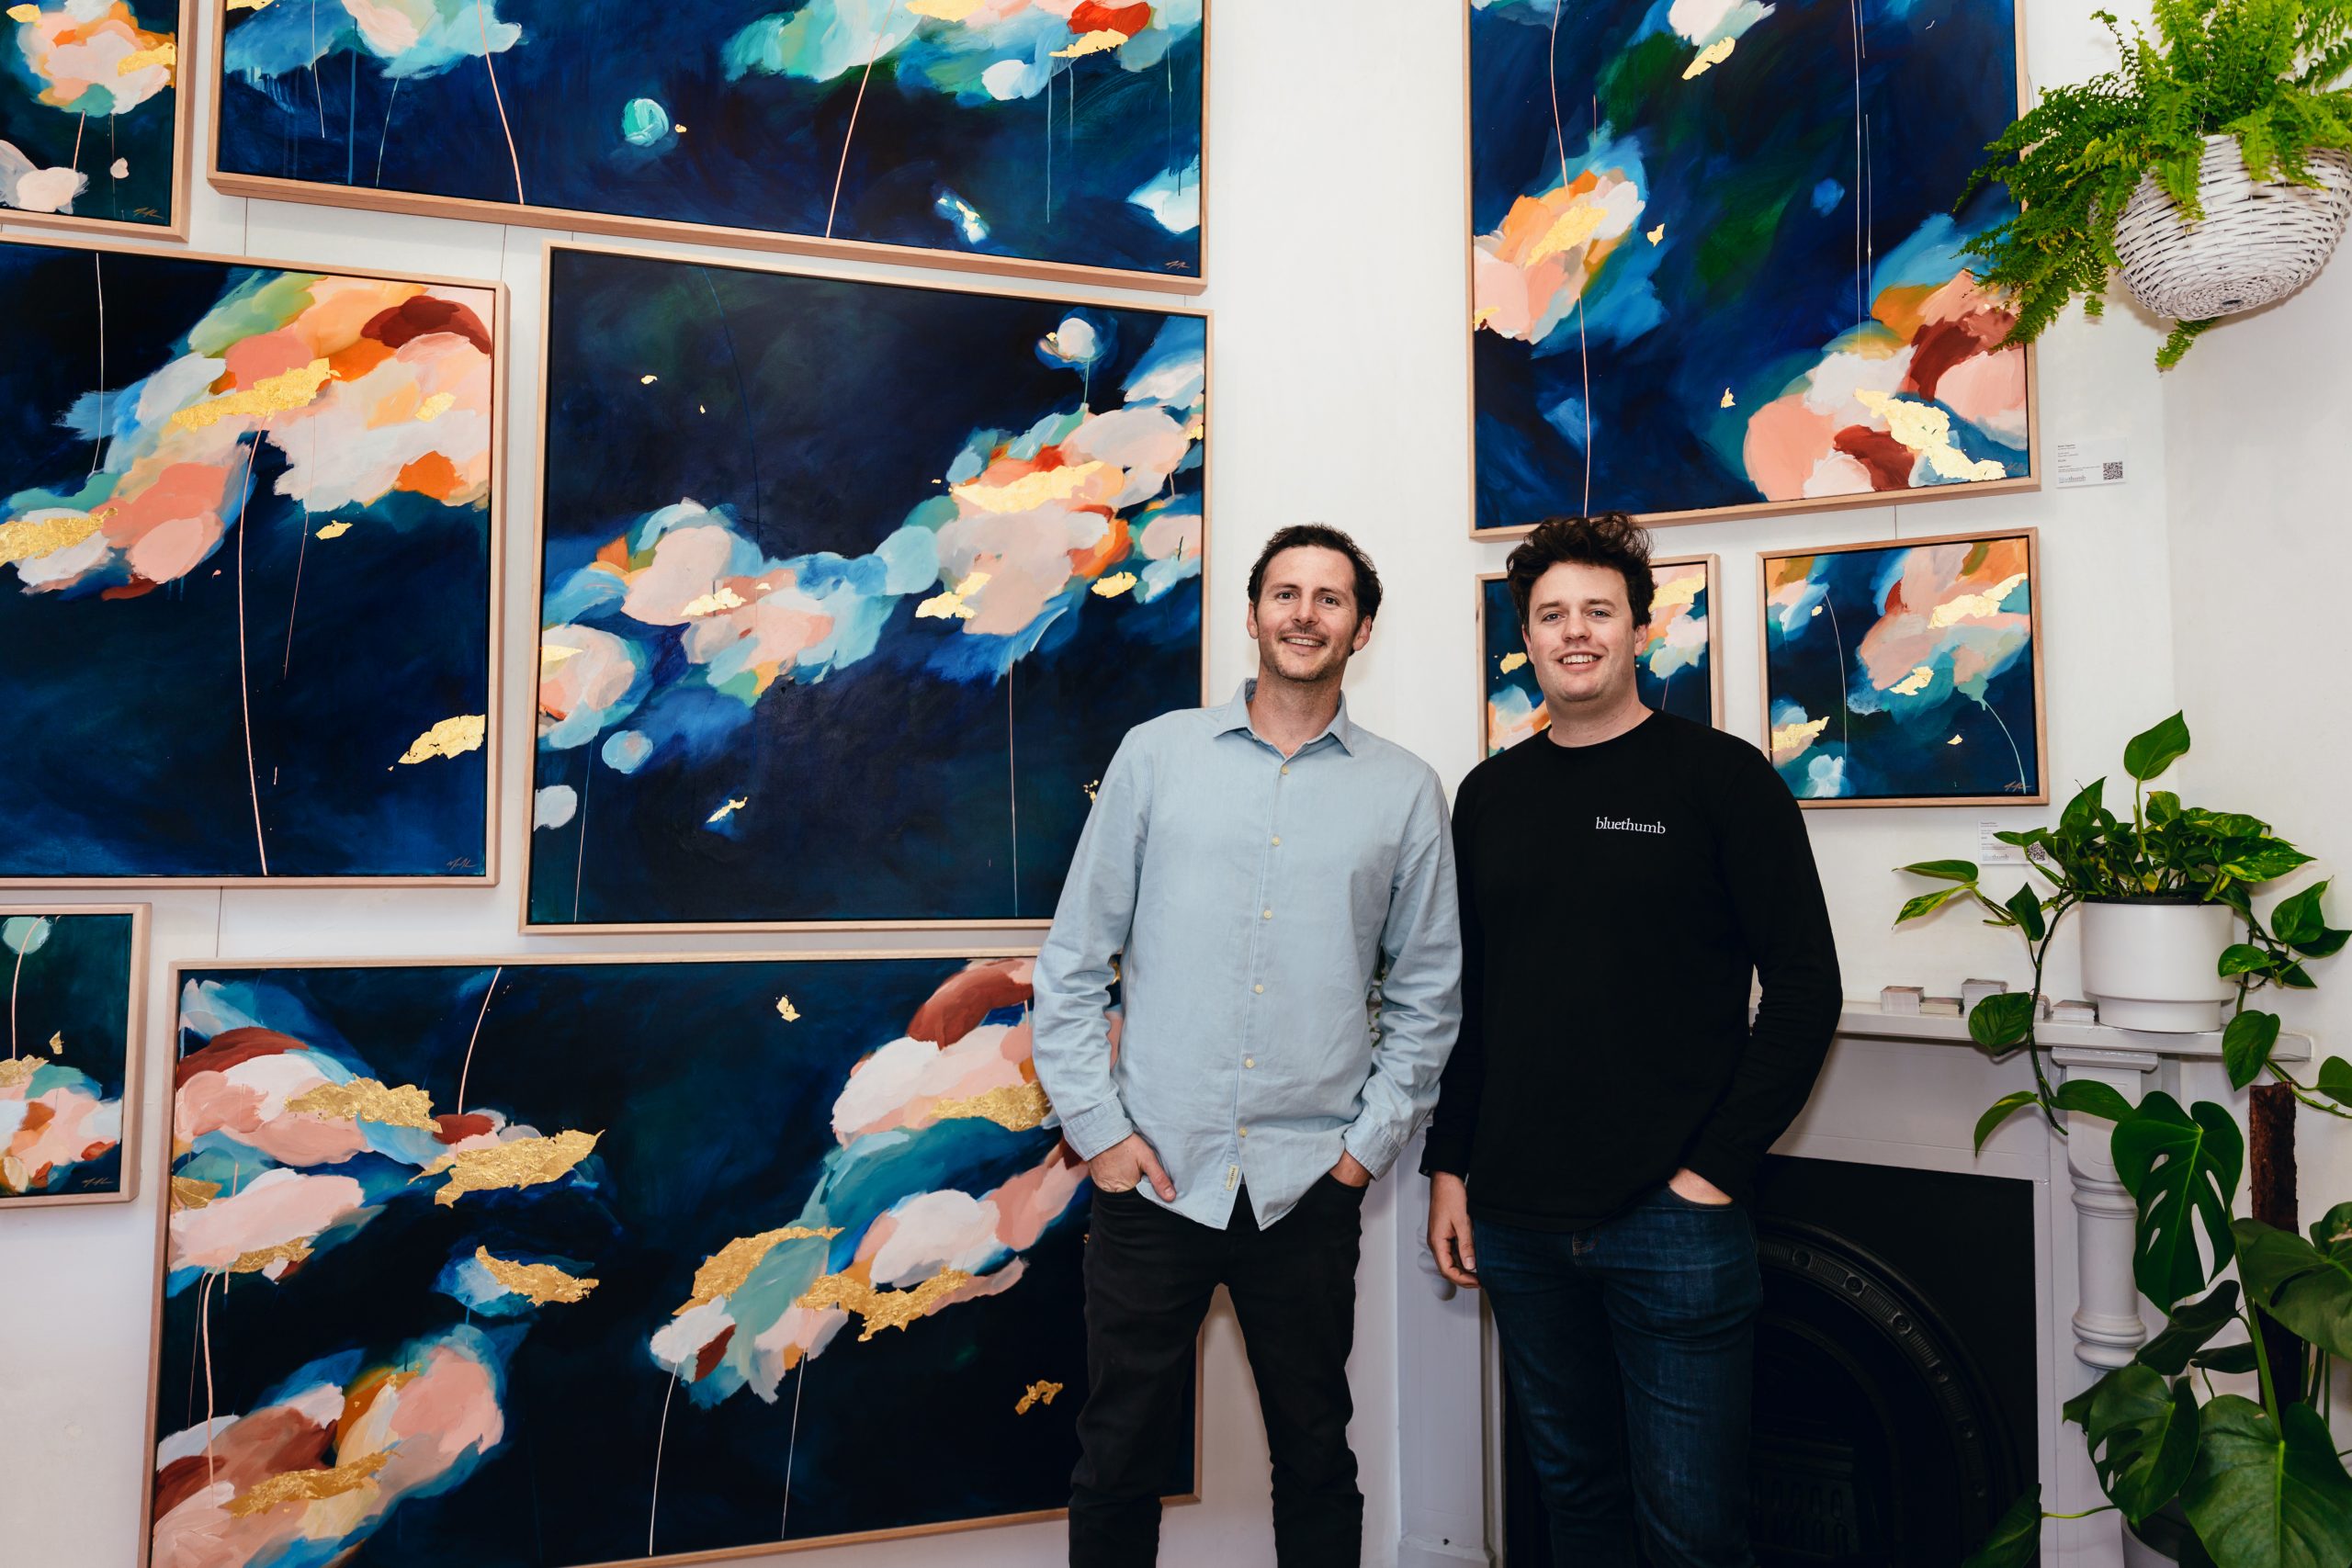 Co-founders Ed and George are bringing NFTs to Bluethumb